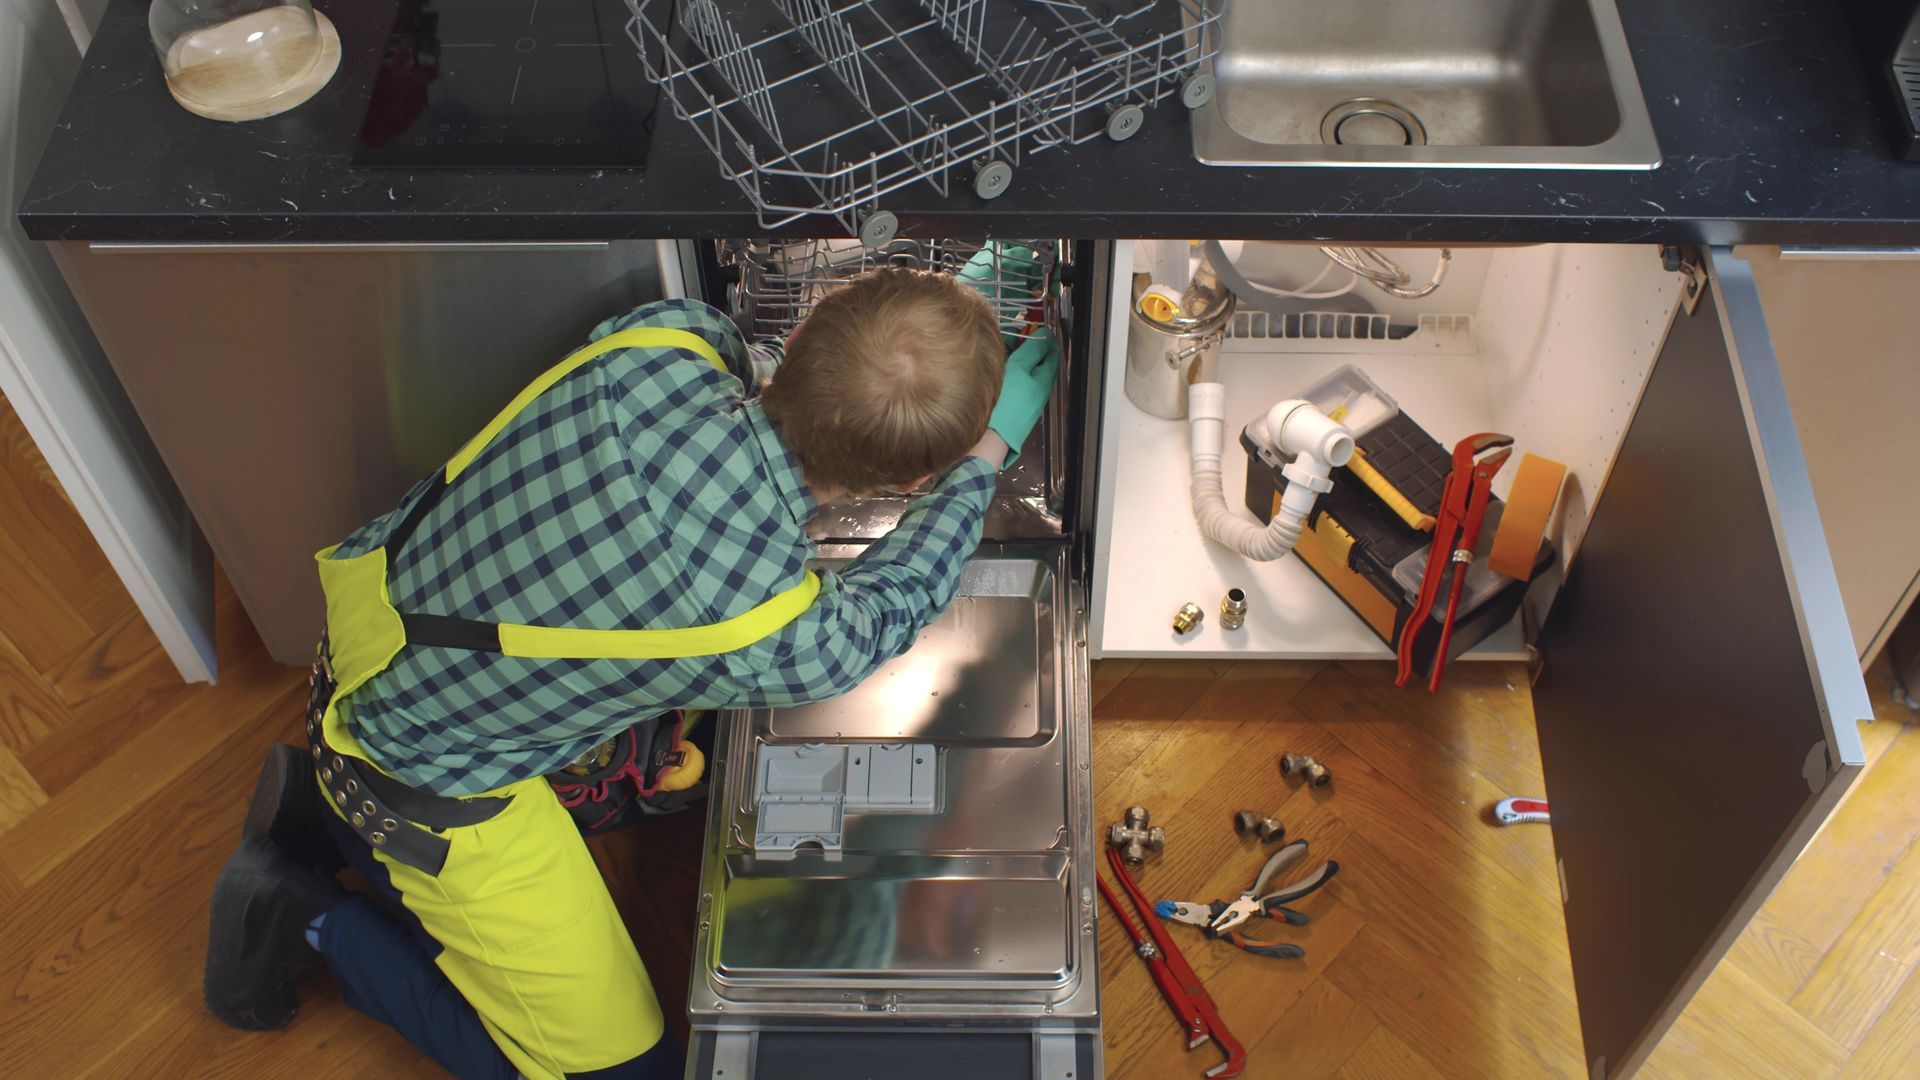 a man in a plaid shirt is working on a dishwasher